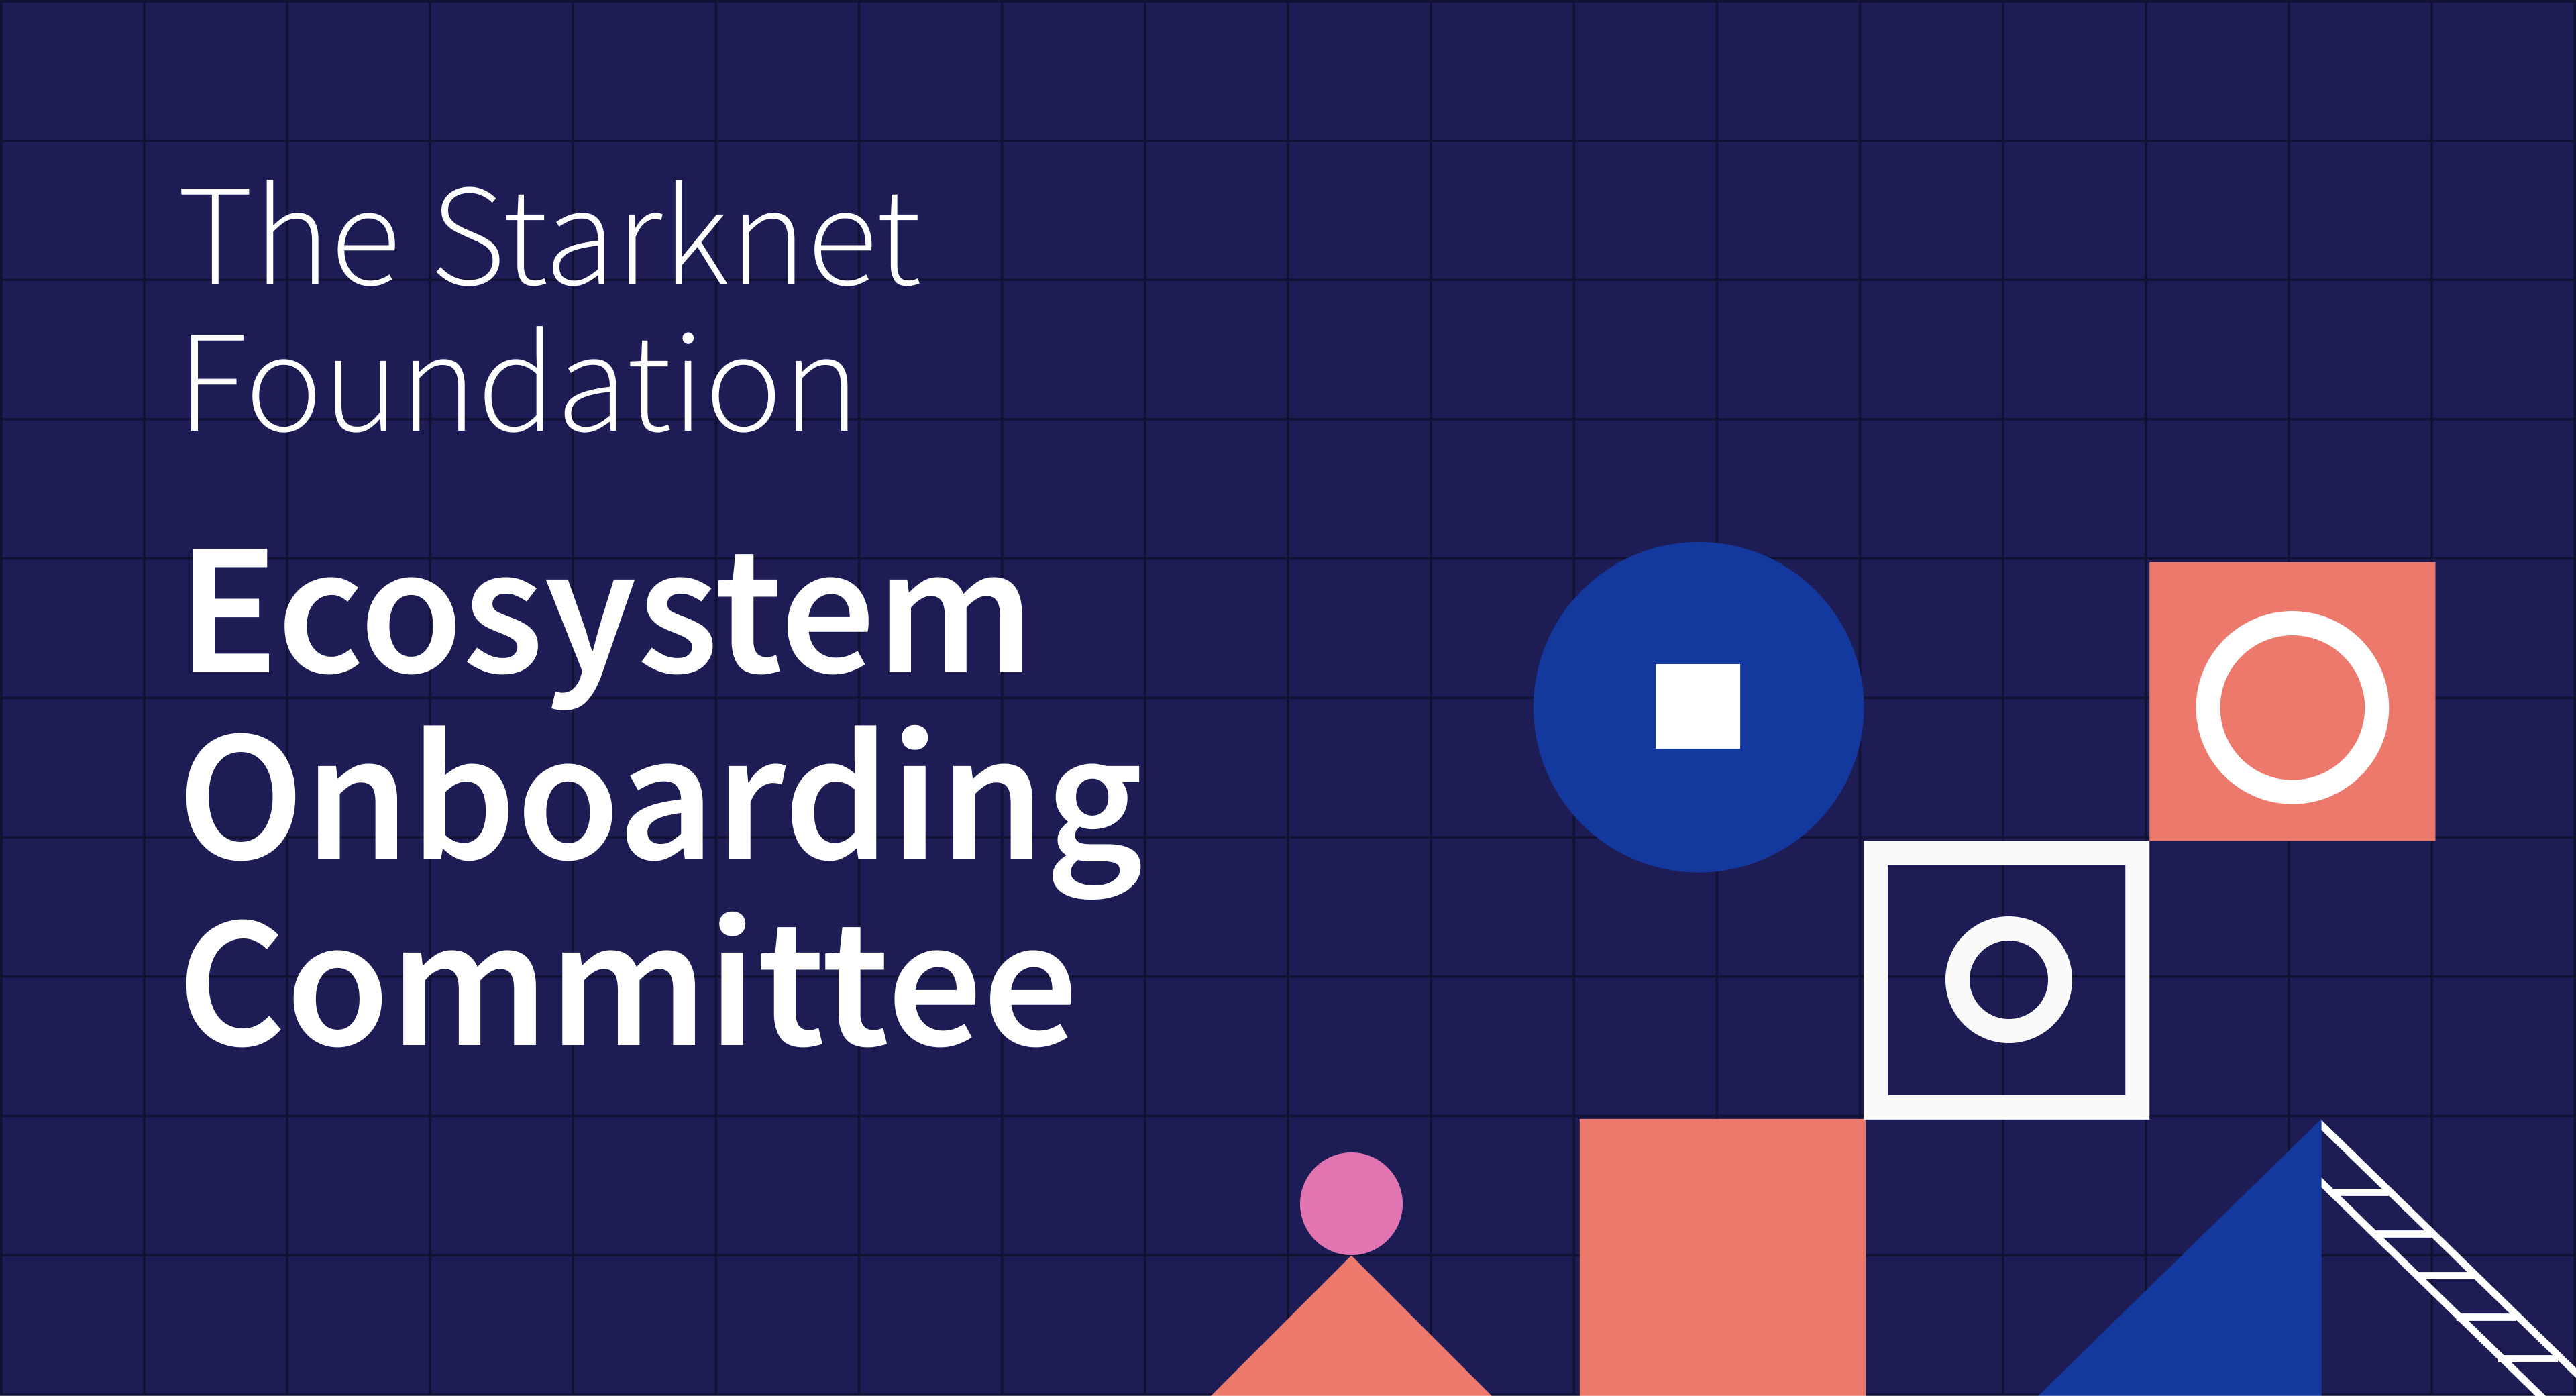 Introducing: The Starknet Foundation Ecosystem Onboarding Committee